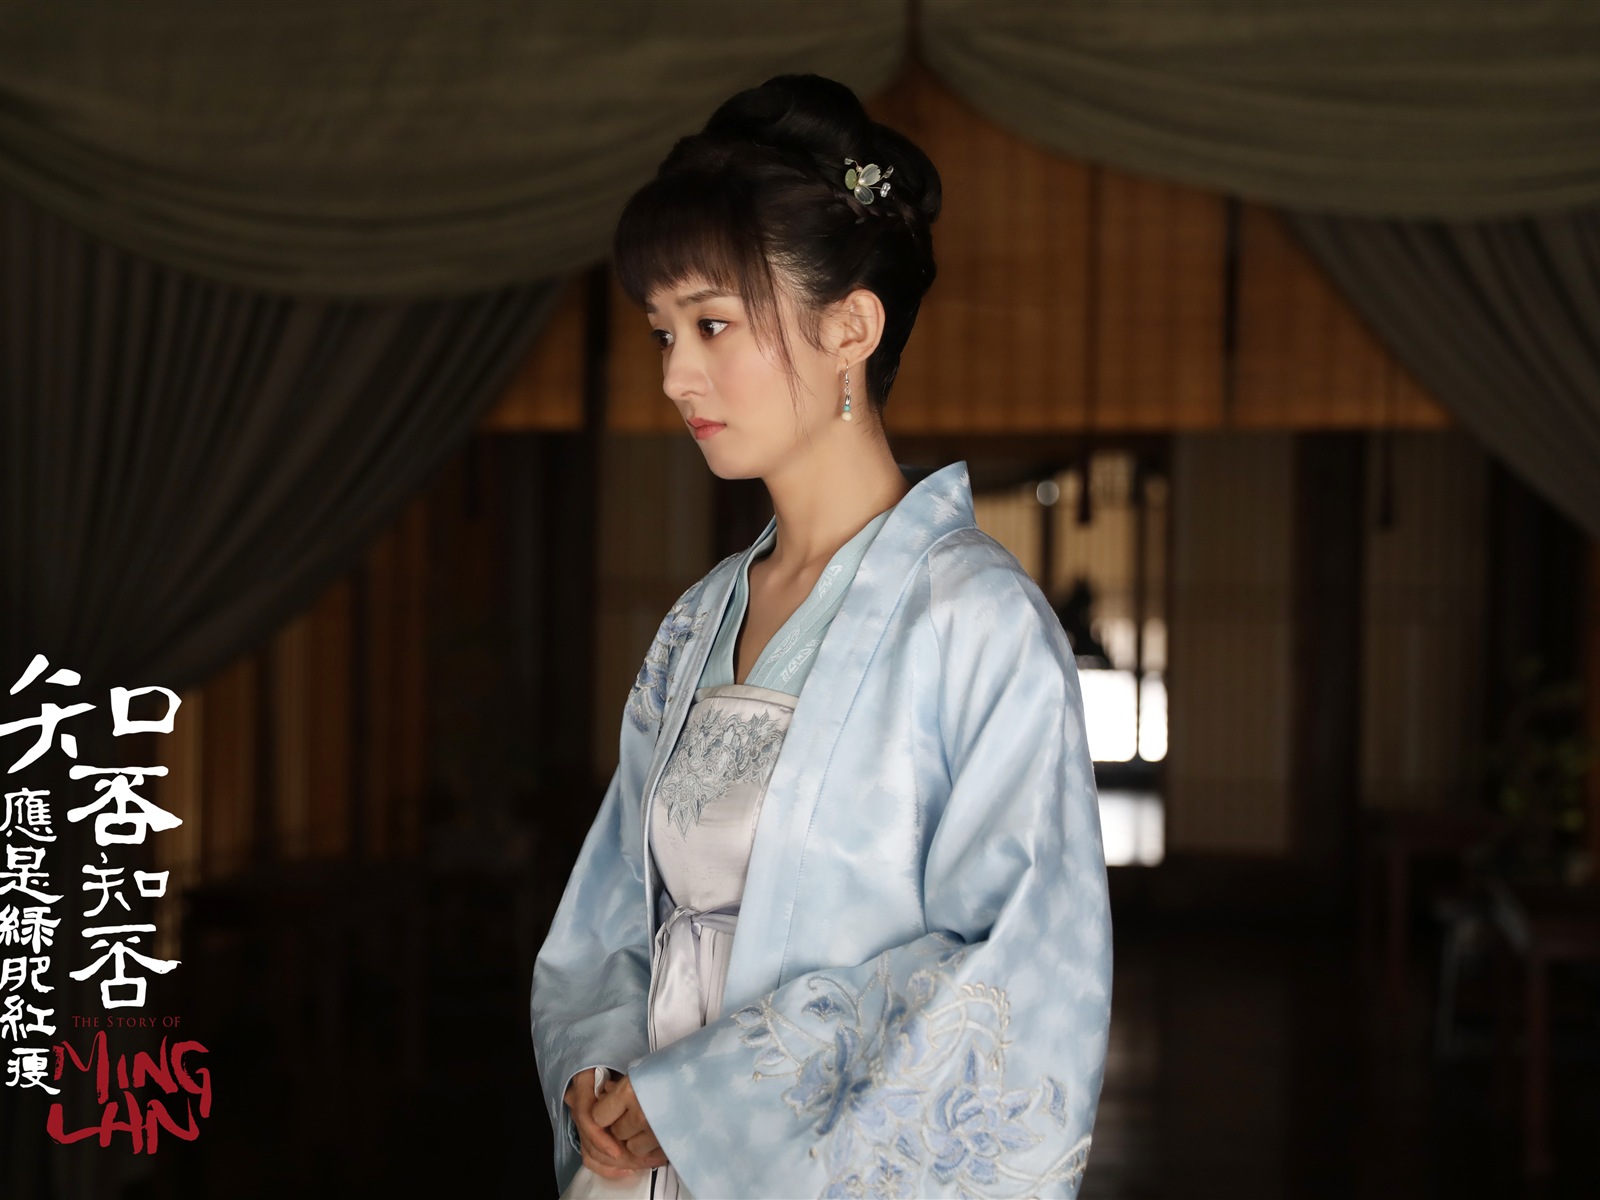 The Story Of MingLan, TV series HD wallpapers #45 - 1600x1200